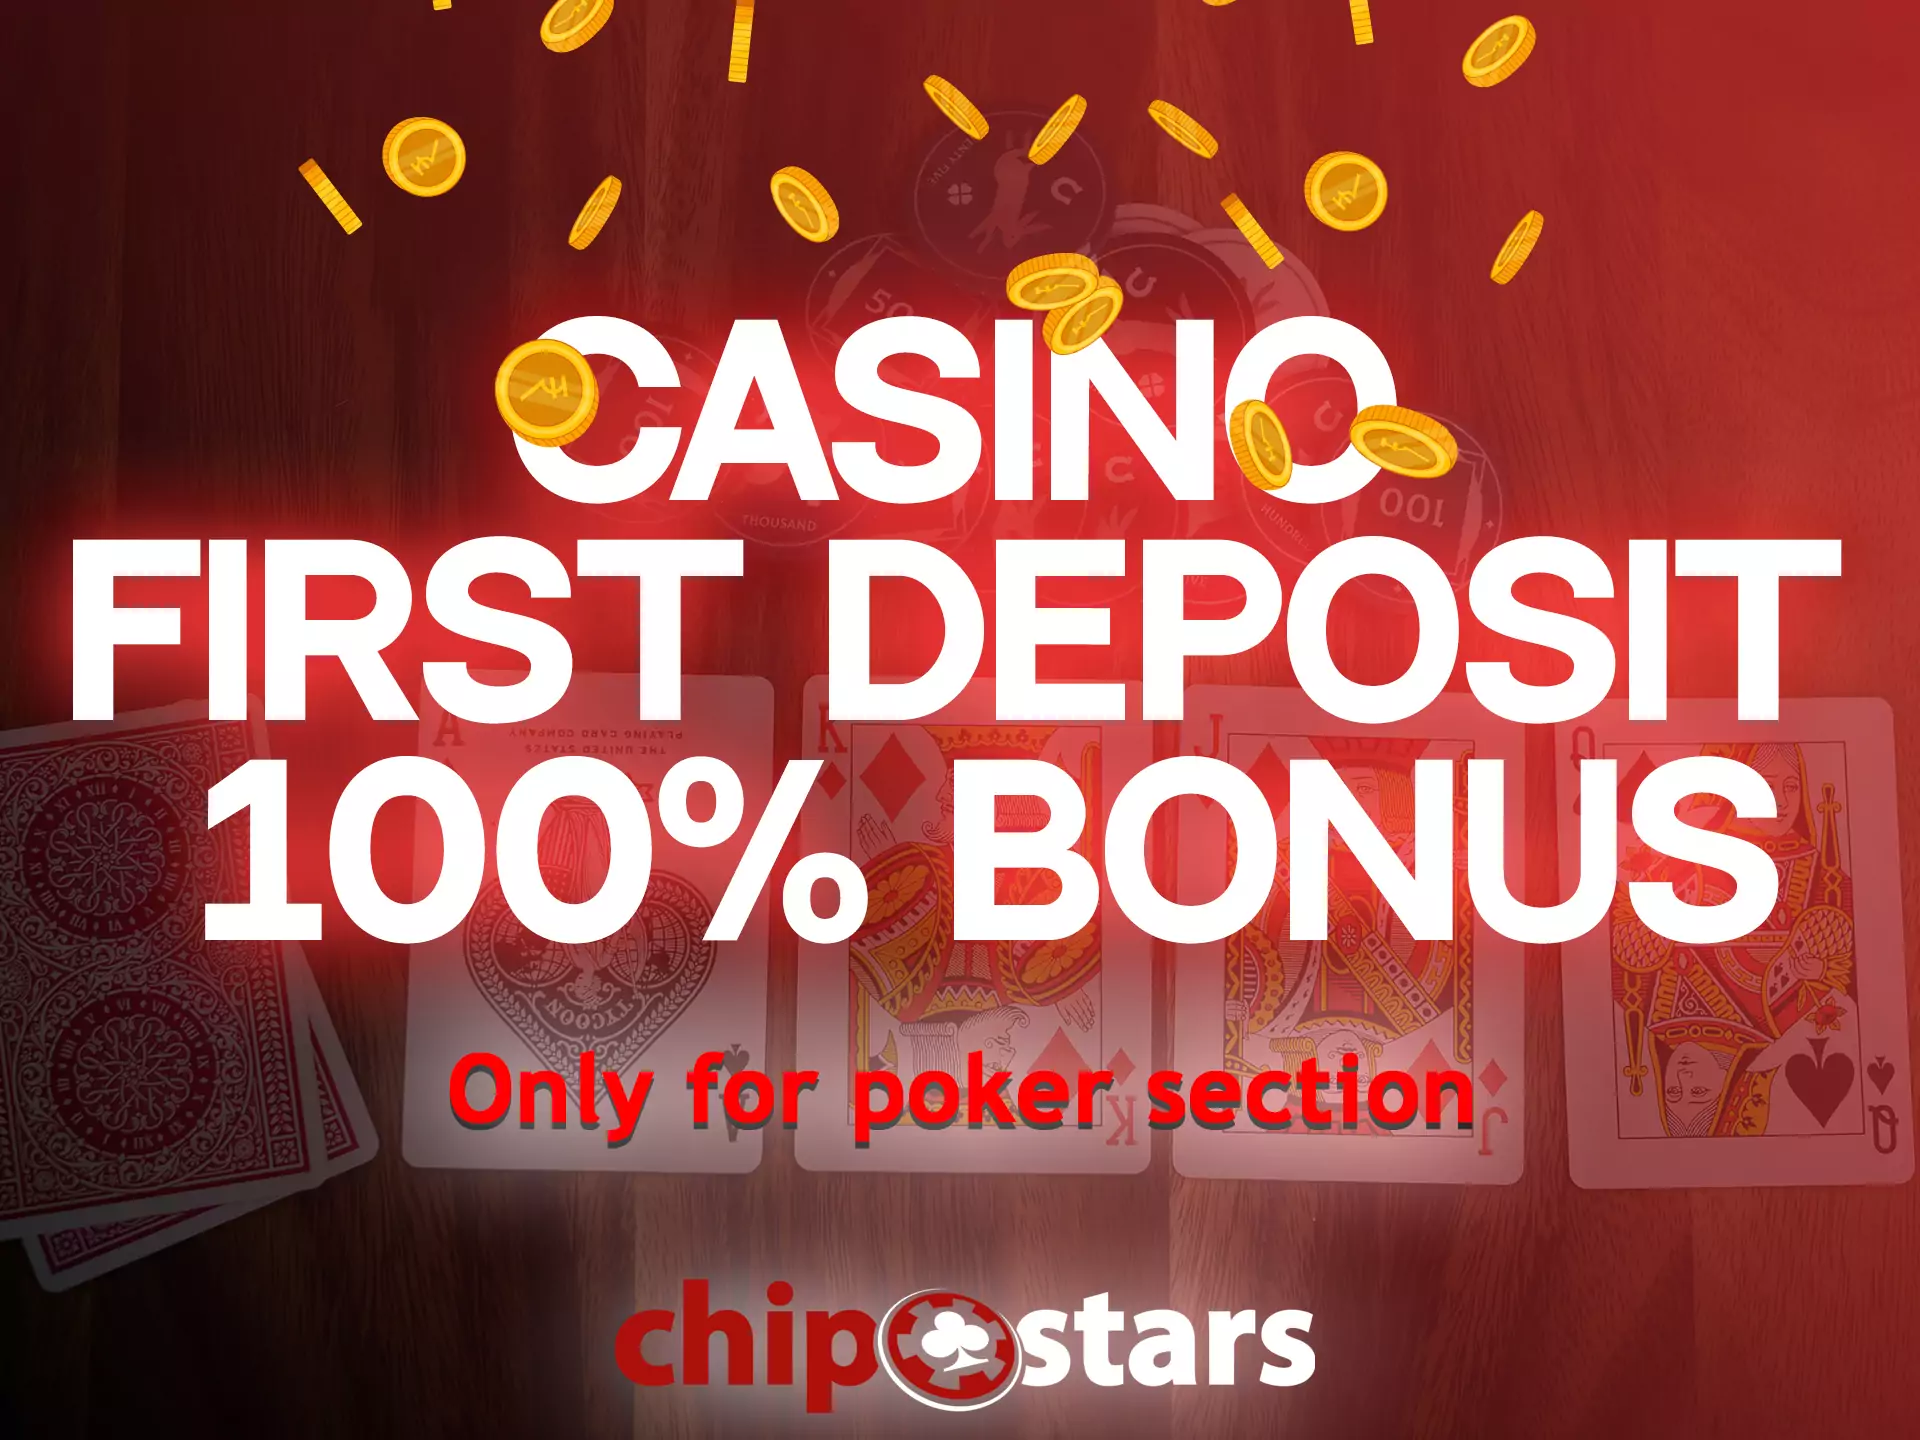 New users can claim a special casino bonus on the first deposit from Chipstars.